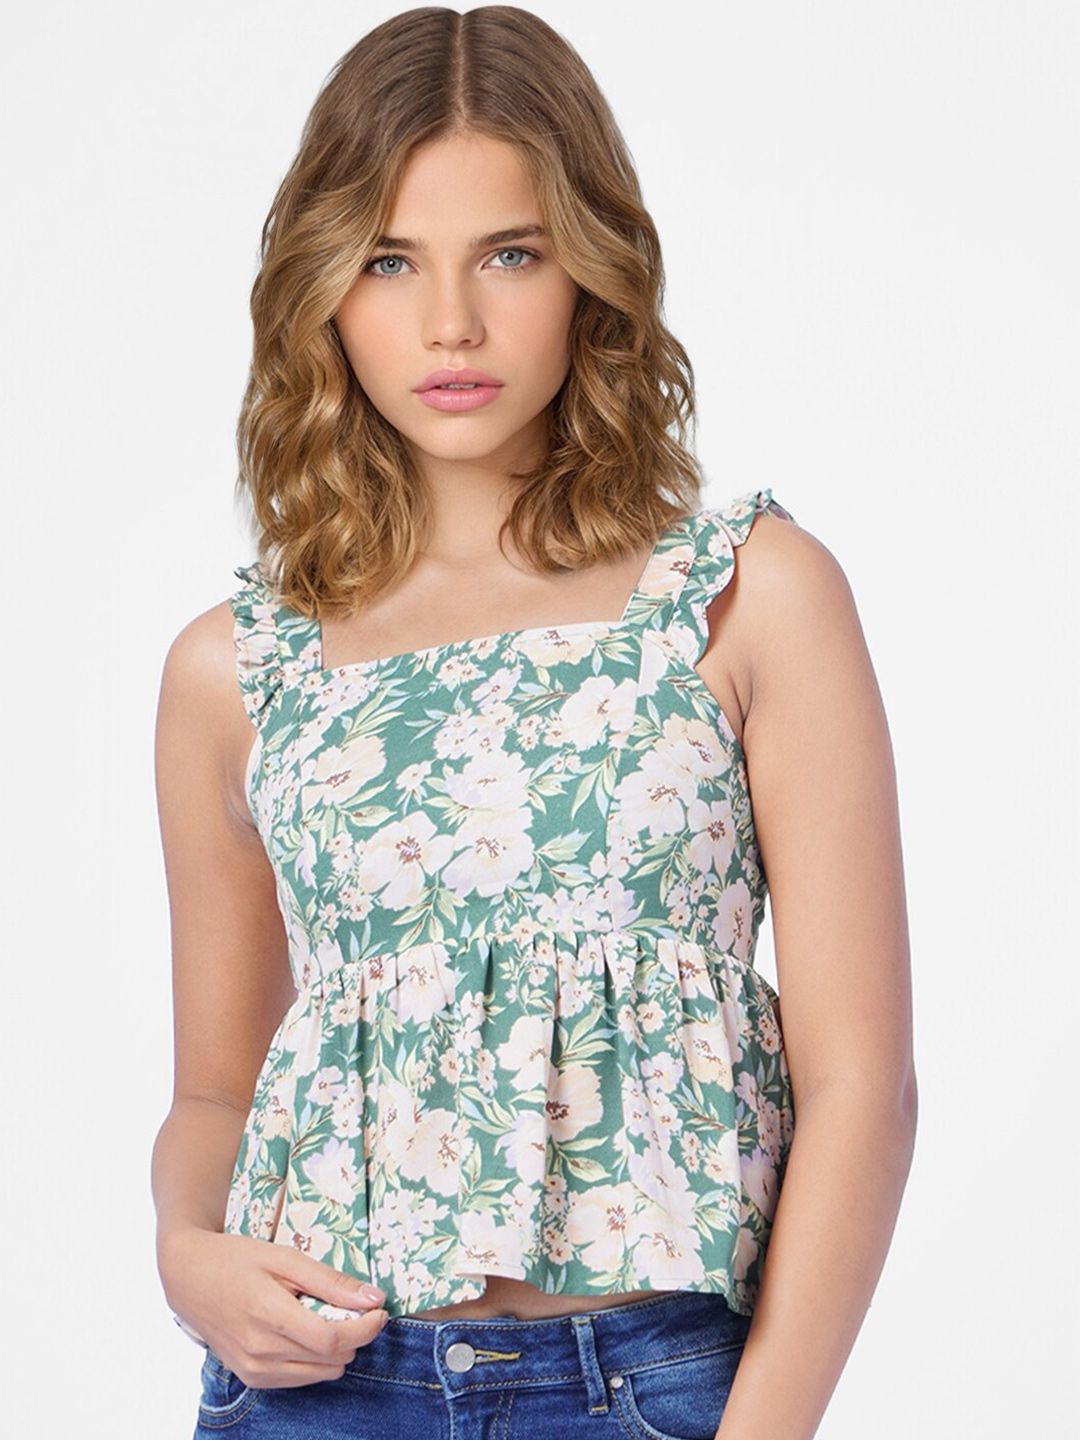 ONLY Women Green Floral Print Peplum Top Price in India